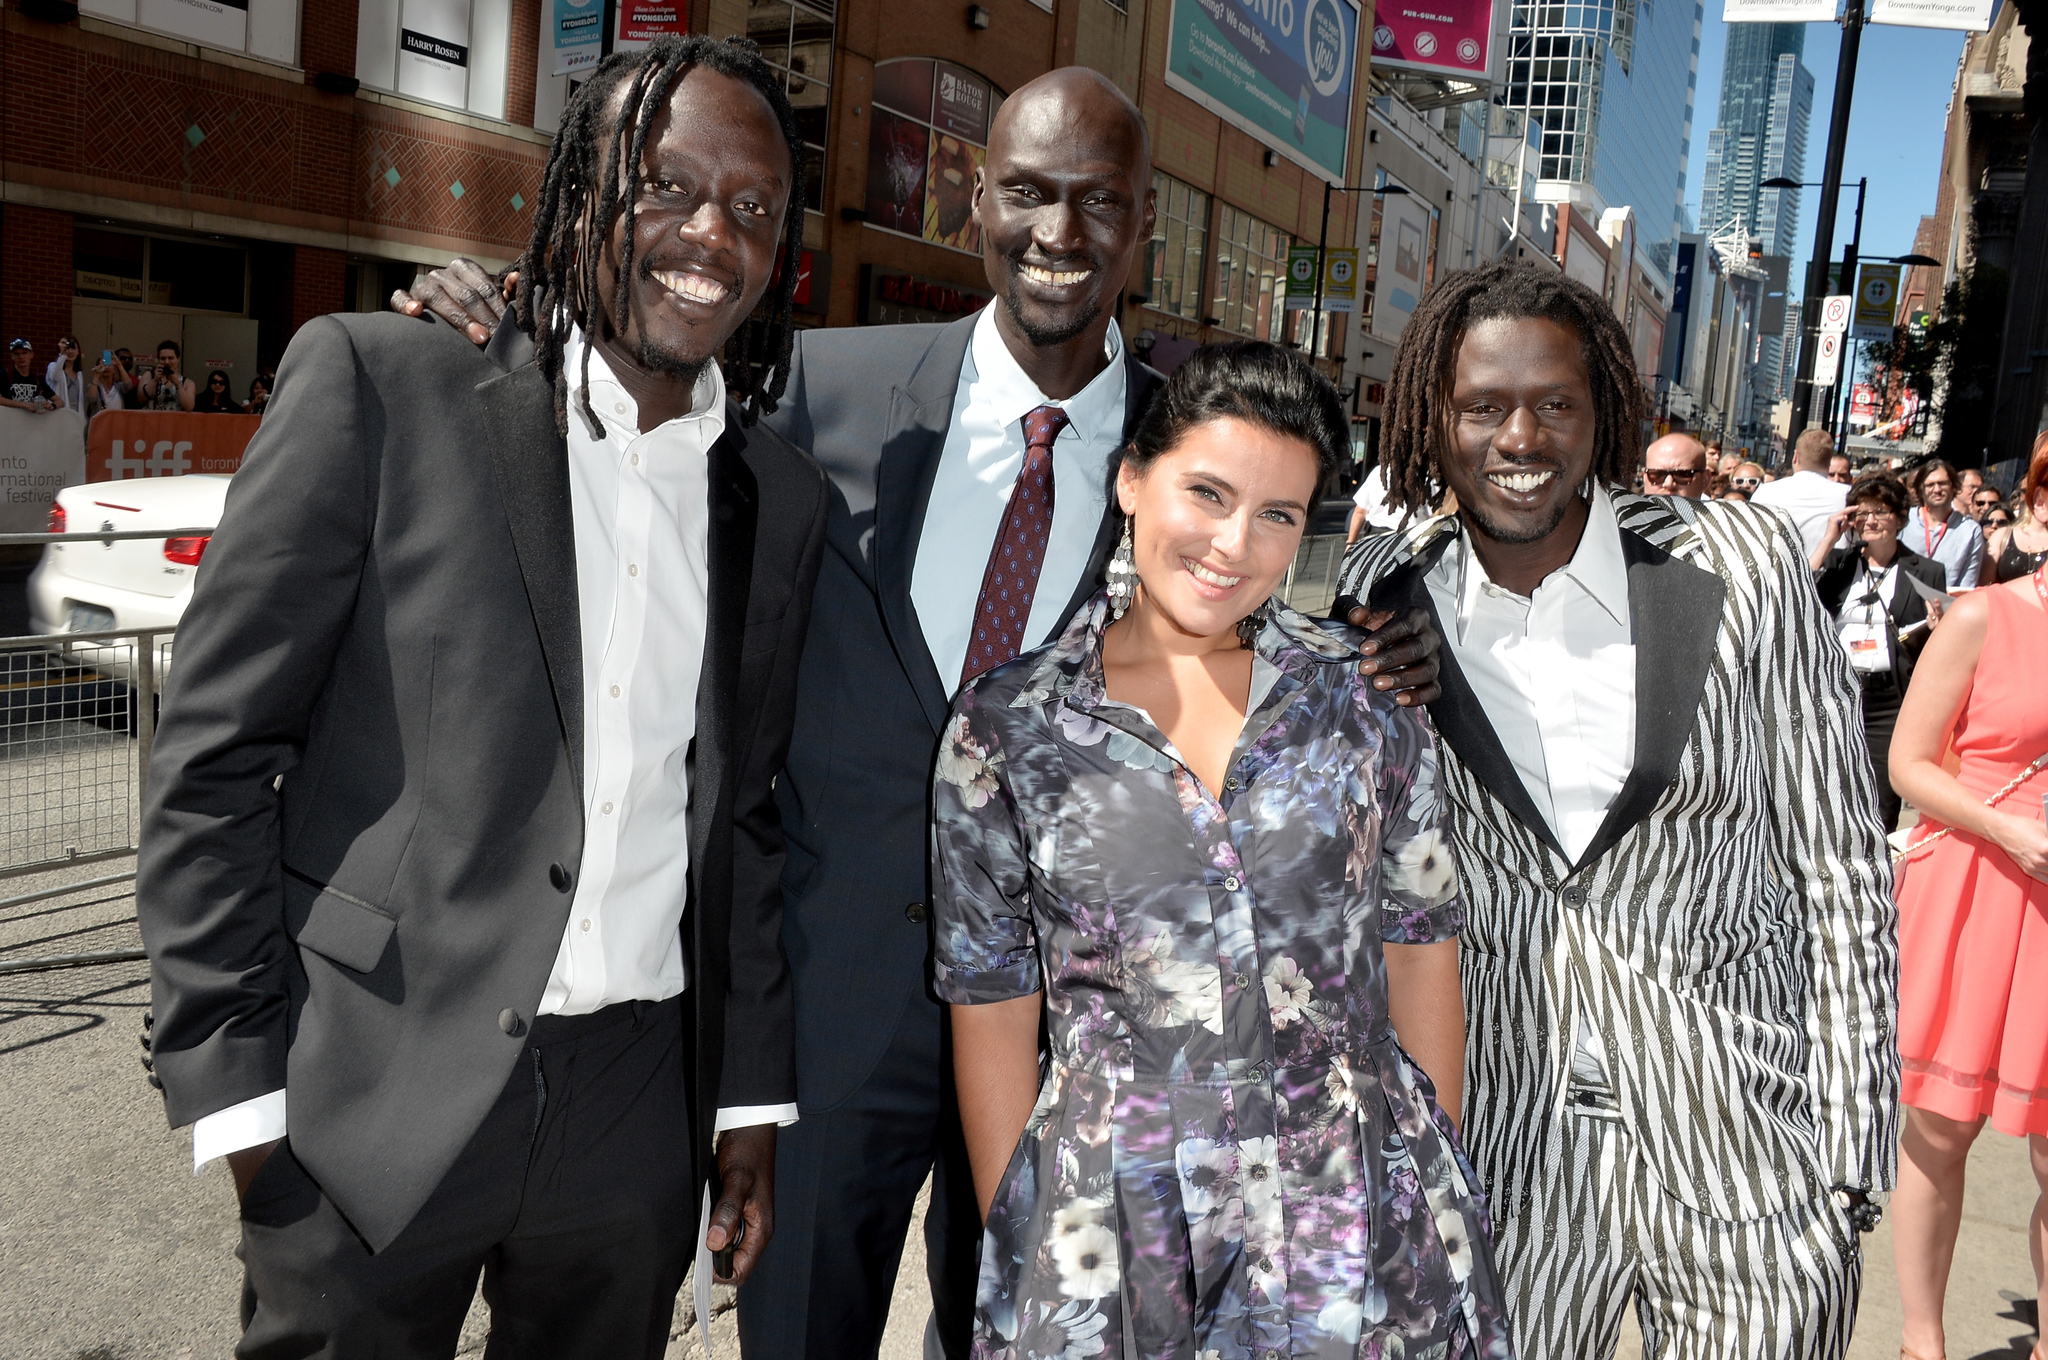 Nelly Furtado, Ger Duany and Emmanuel Jal at event of The Good Lie (2014)